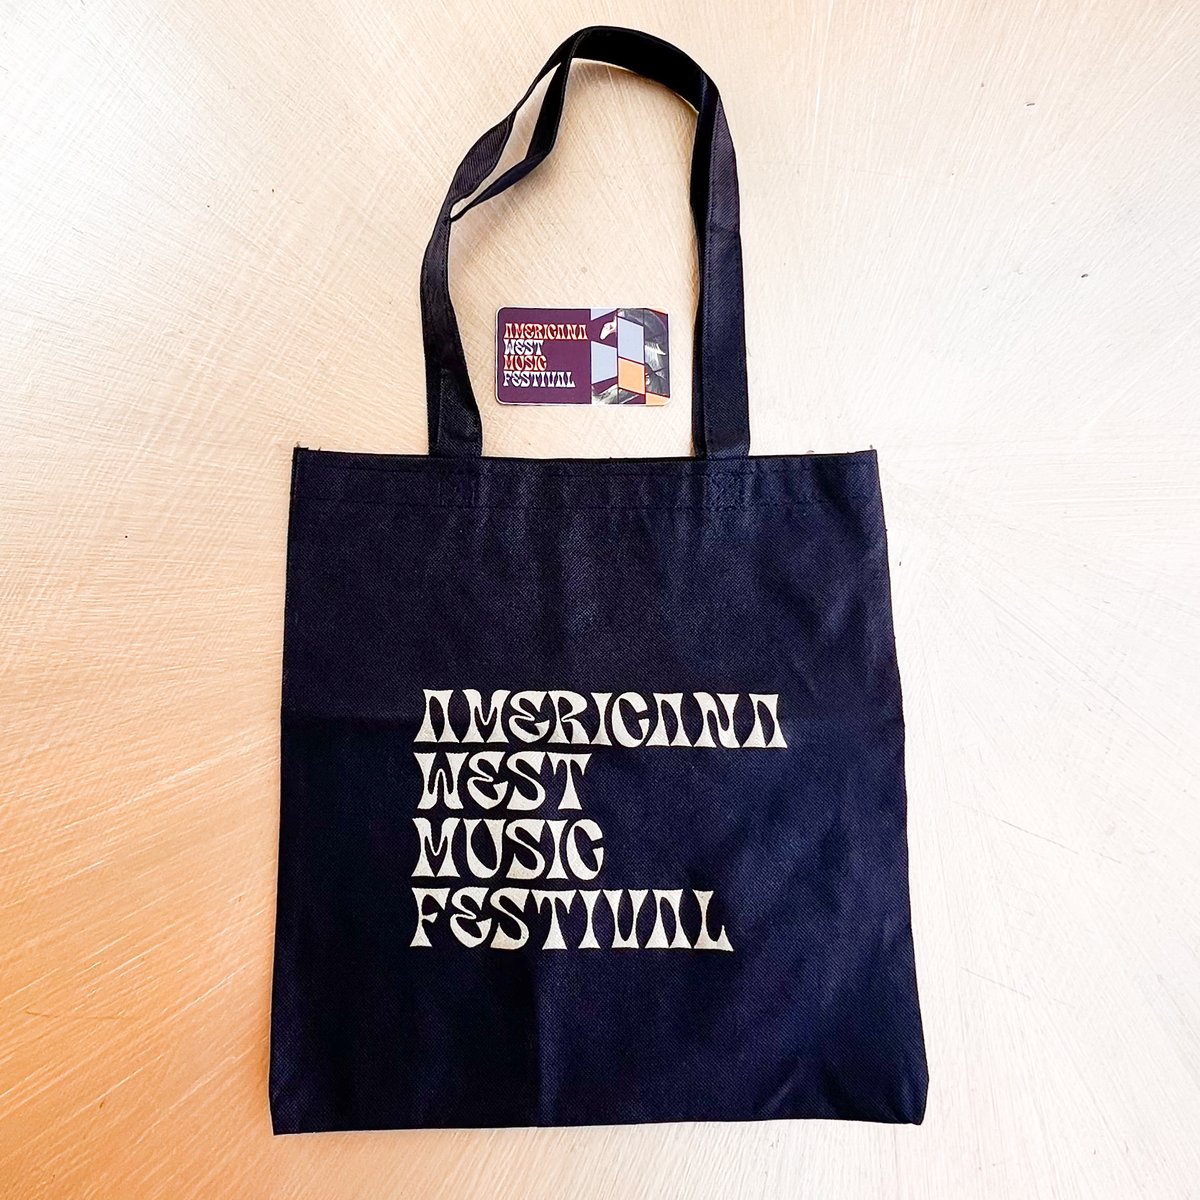 Image of Americana West Music Fest Tote Bag